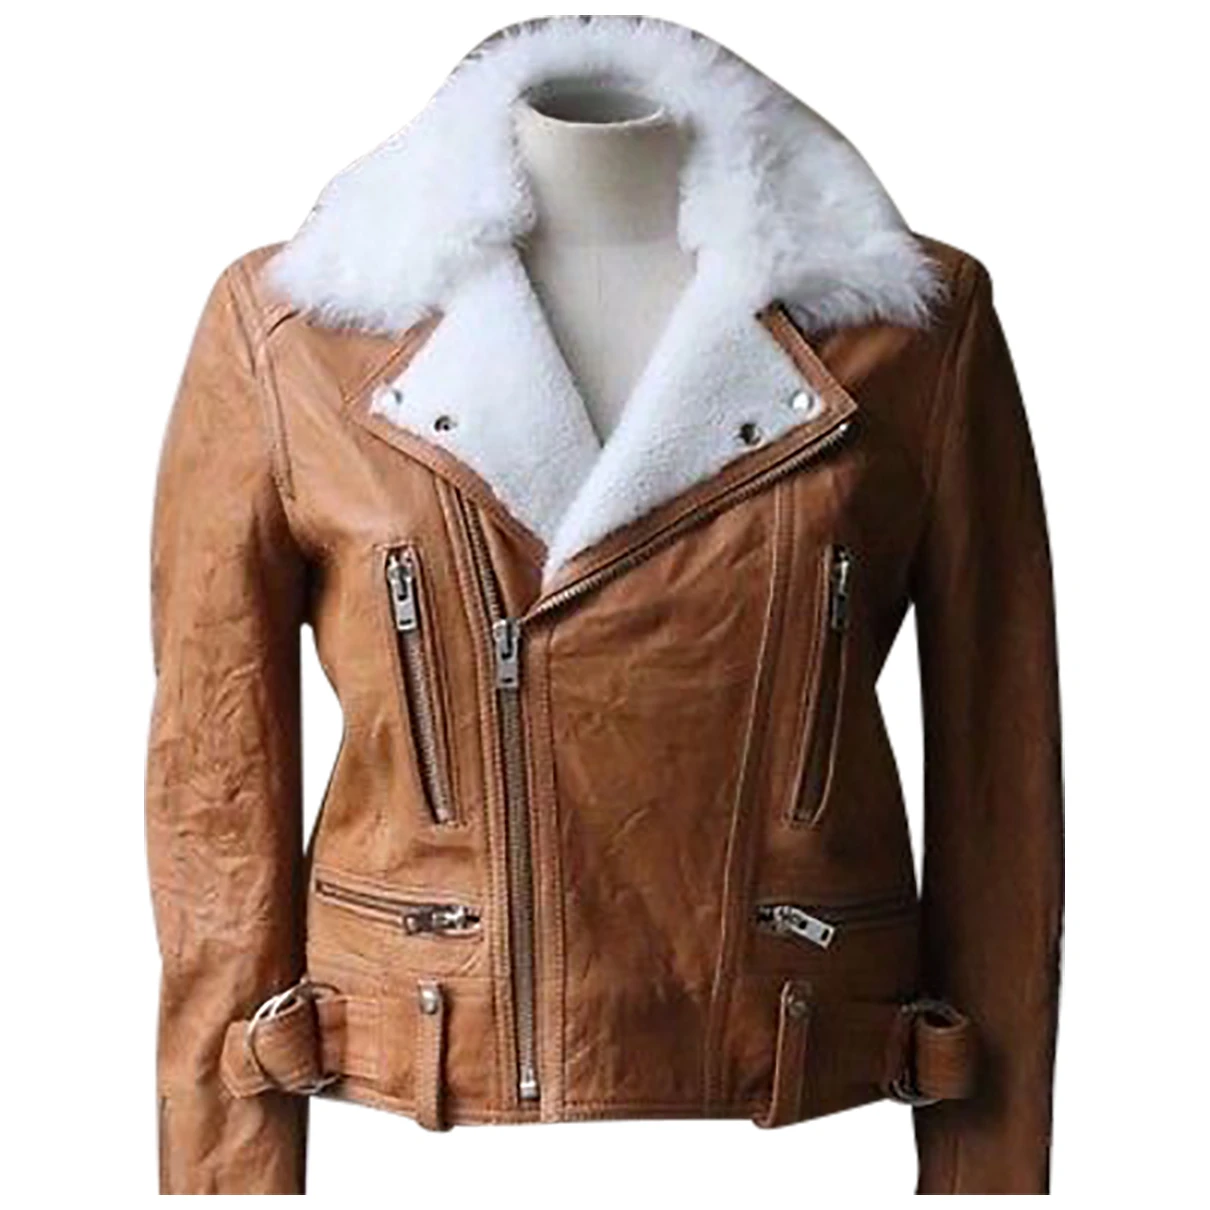 clothing Iro jackets for Female Leather 36 FR. Used condition